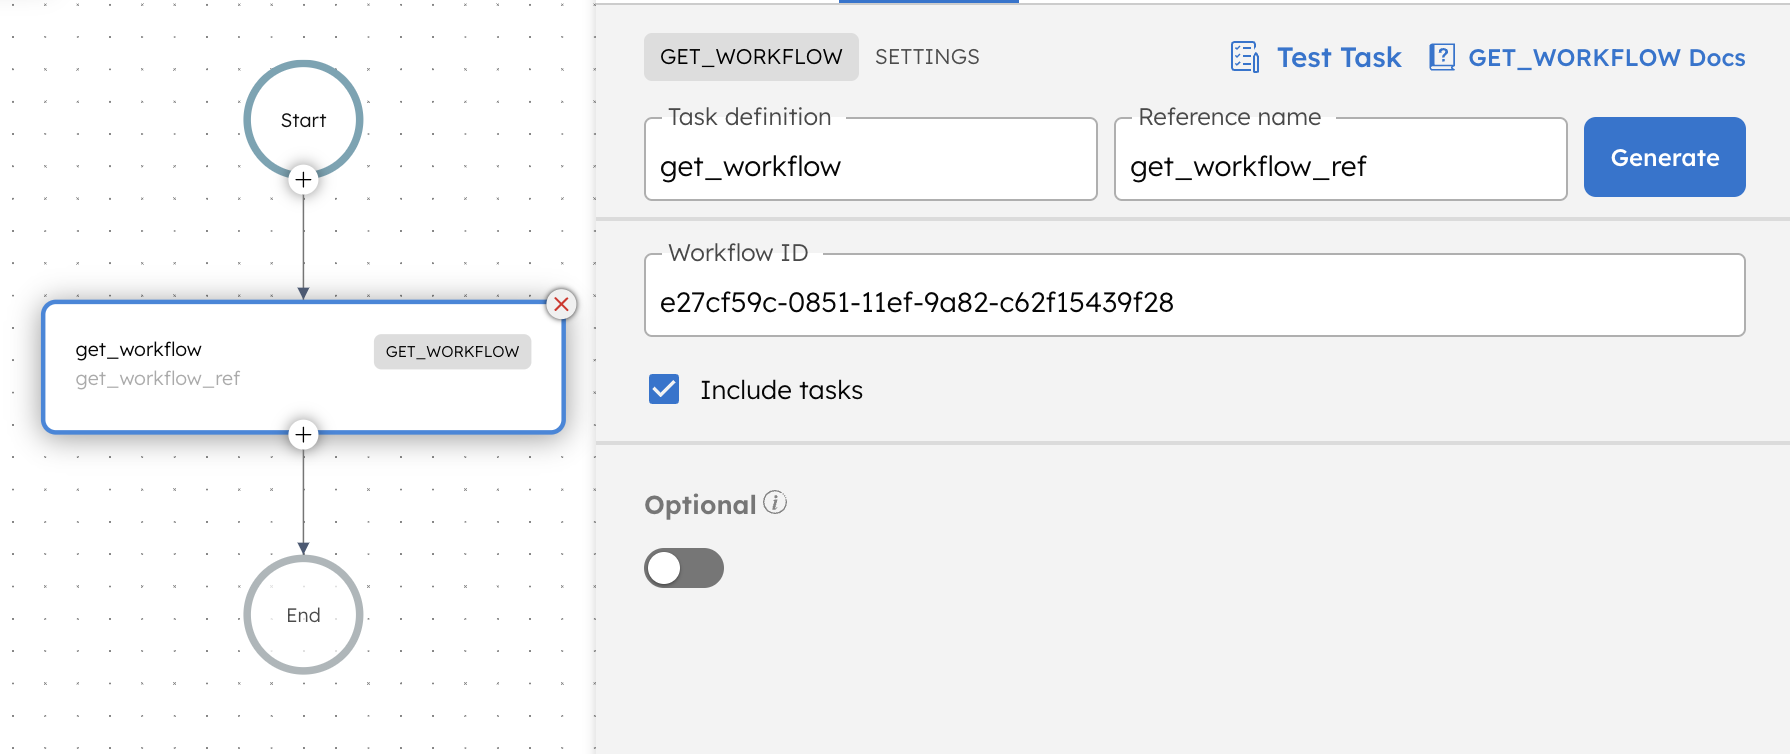 Get workflow task from UI